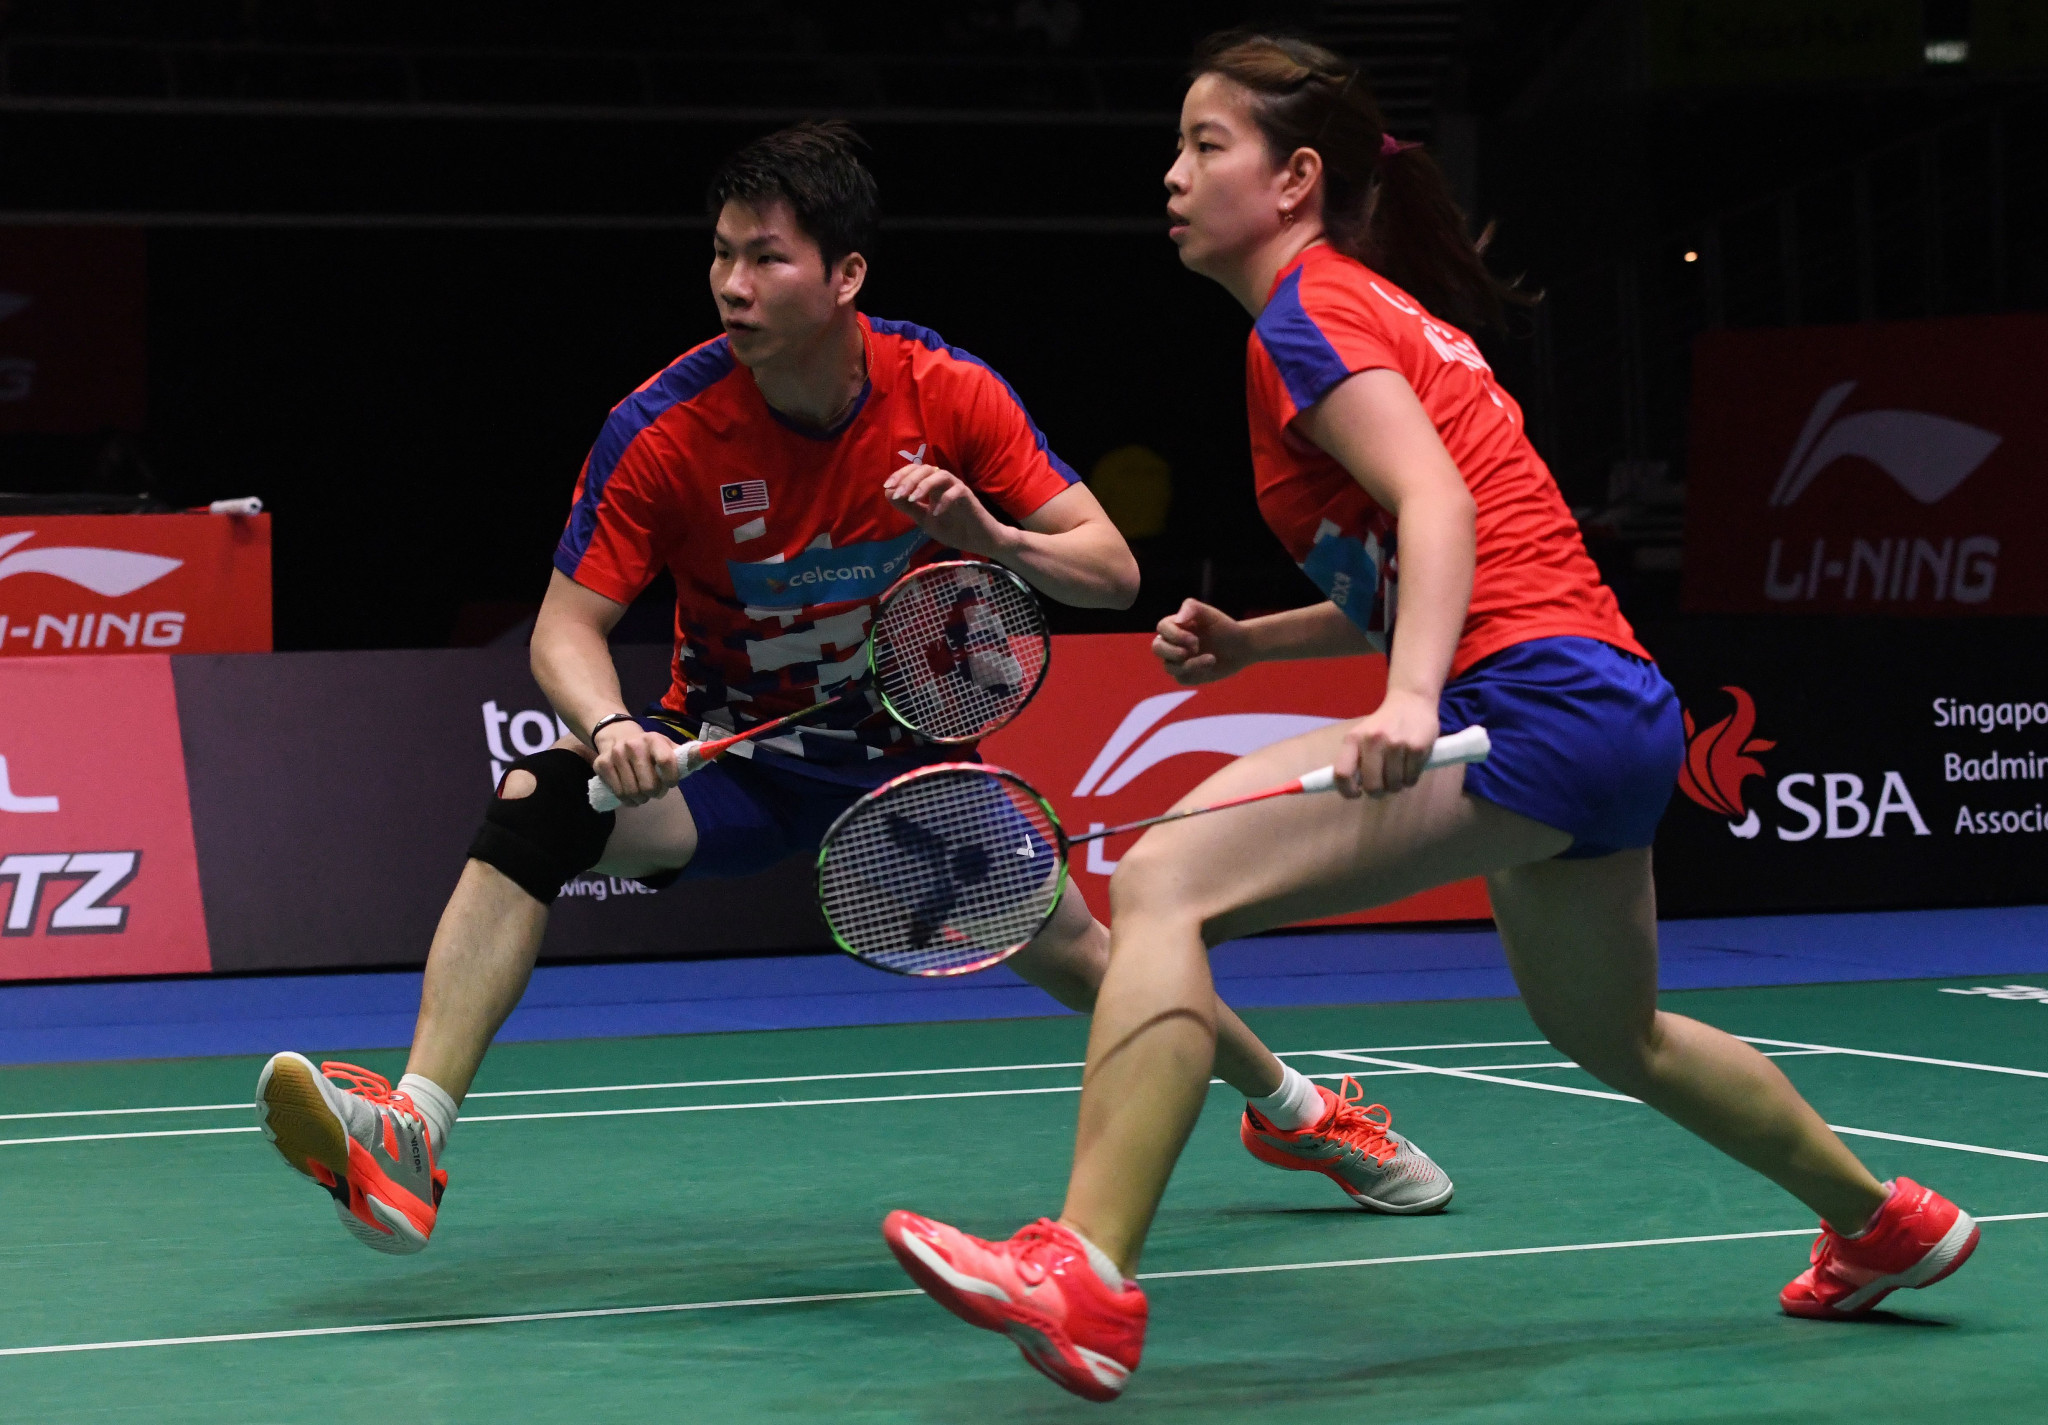 Malaysian mixed doubles badminton pair Goh and Lai announce engagement